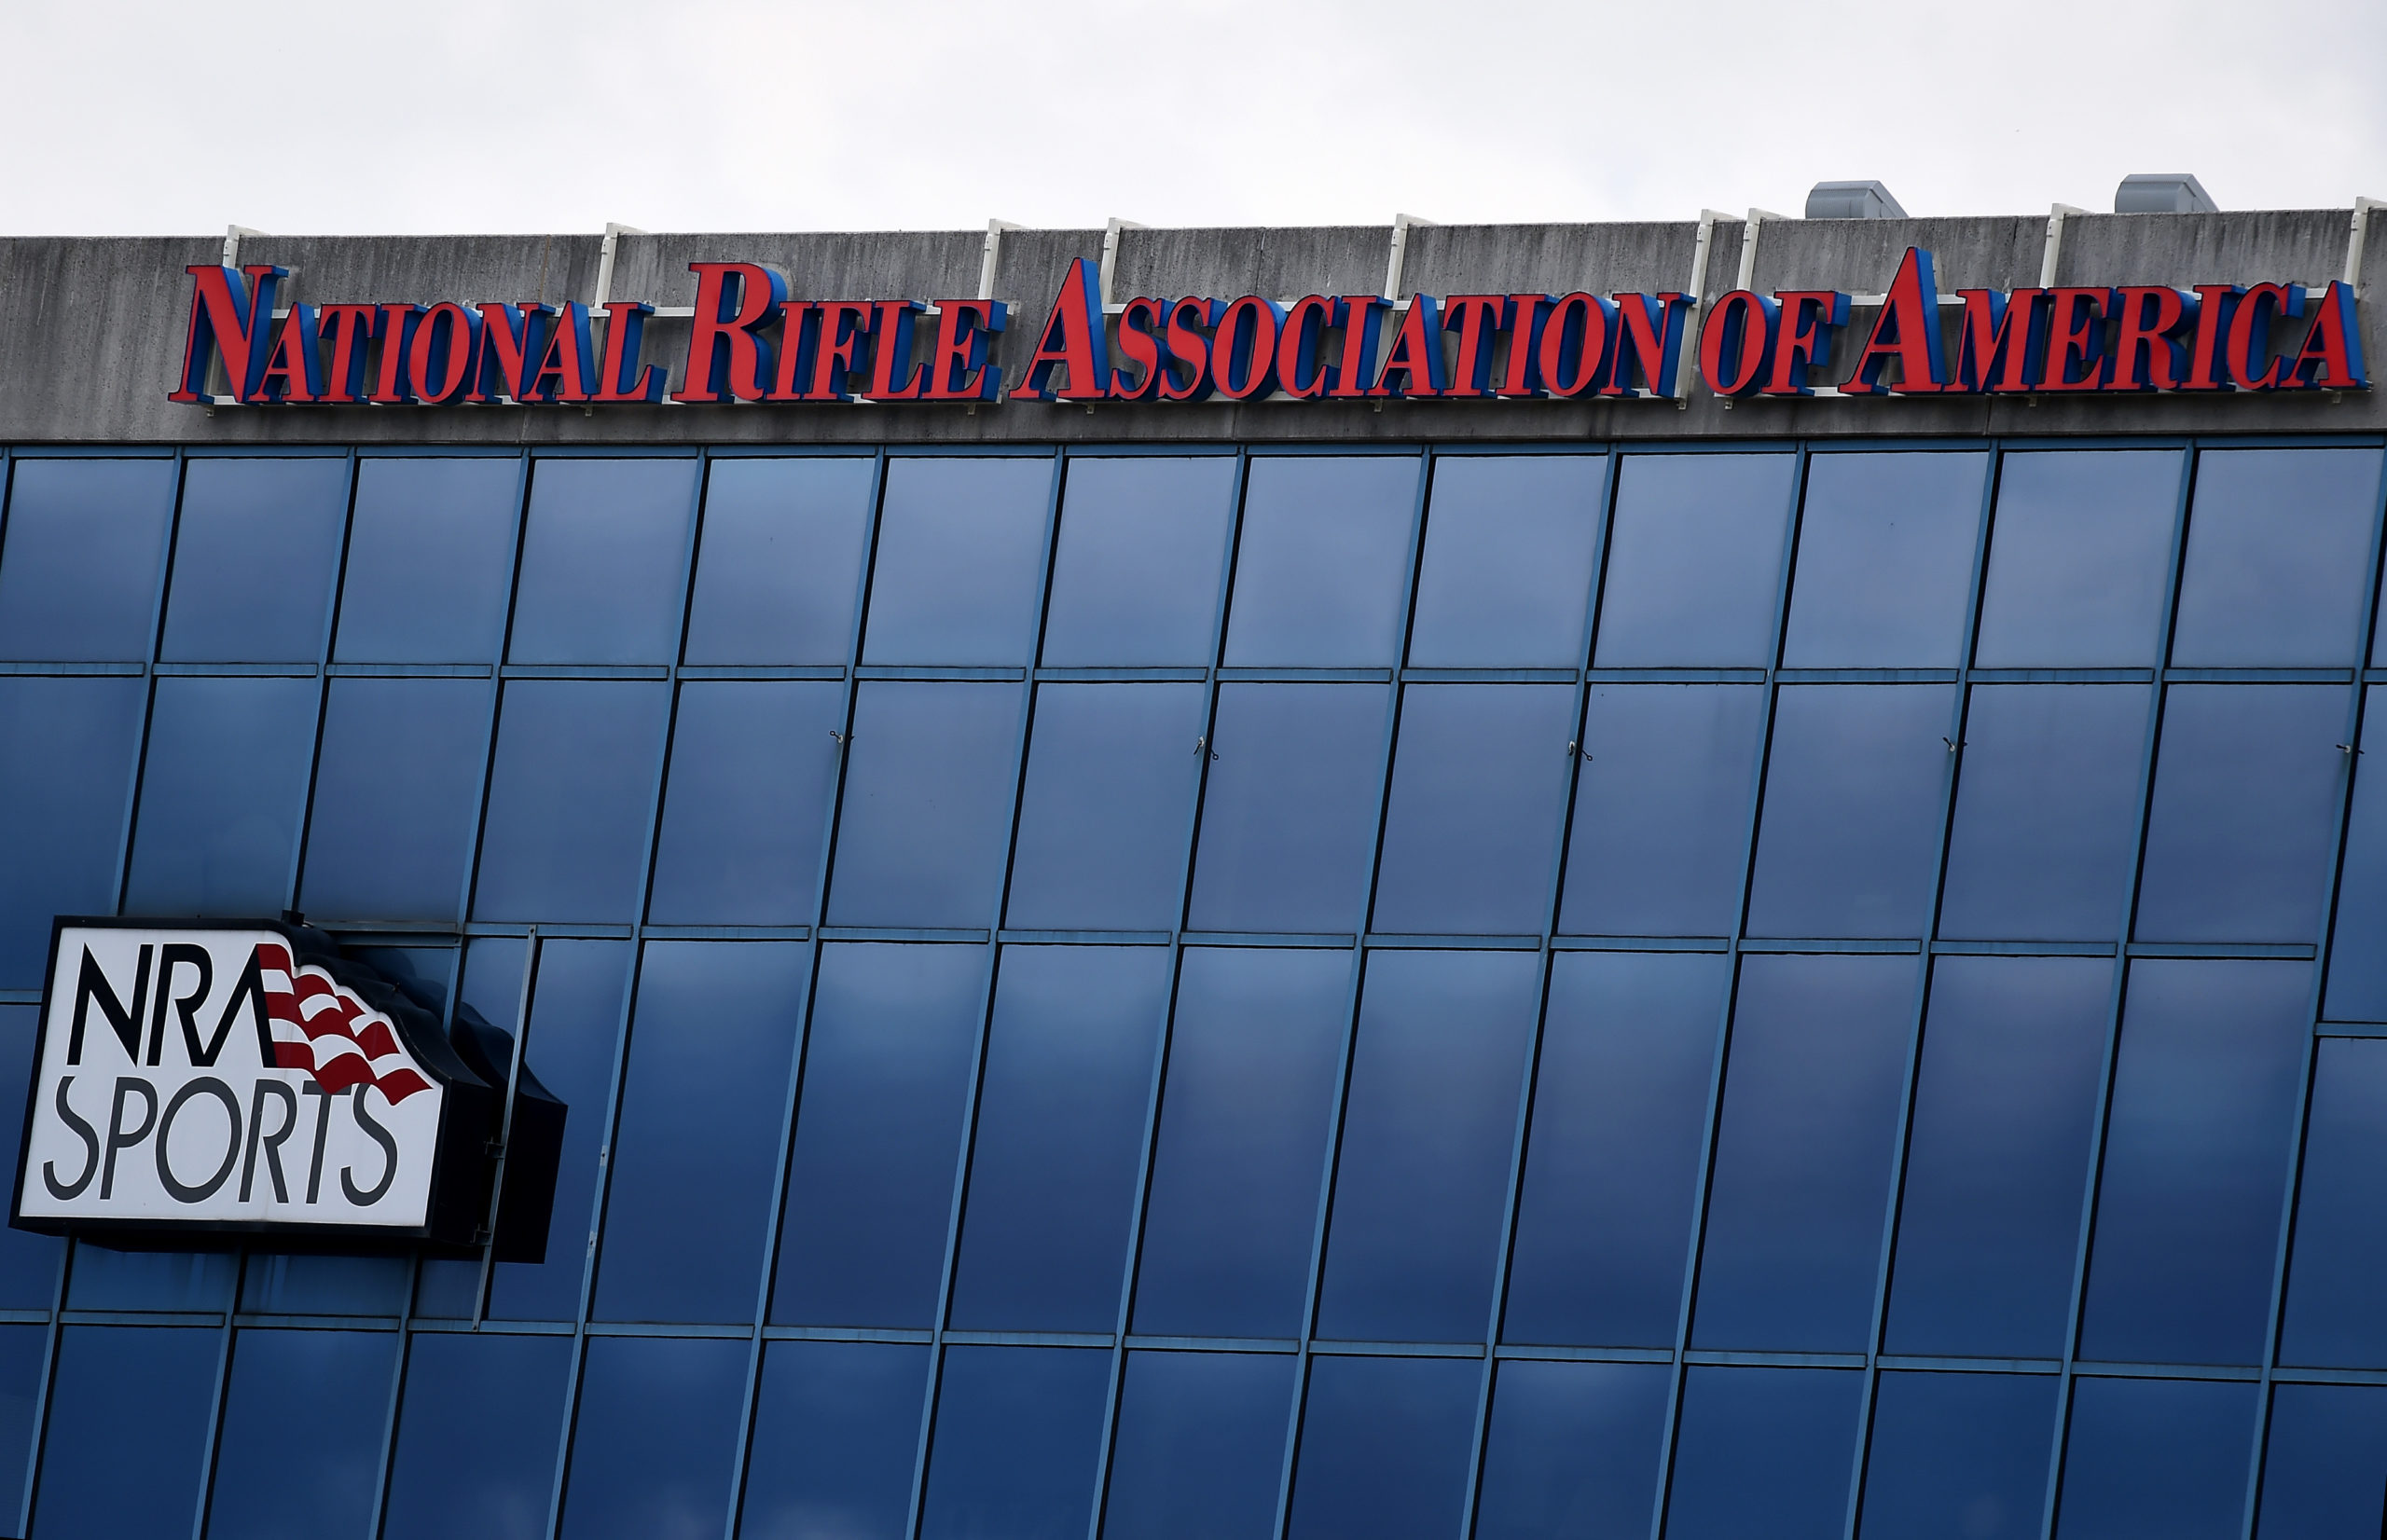 The National Rifle Association of America building in Fairfax, Virginia is pictured in August. (Olivier Douliery/AFP via Getty Images)